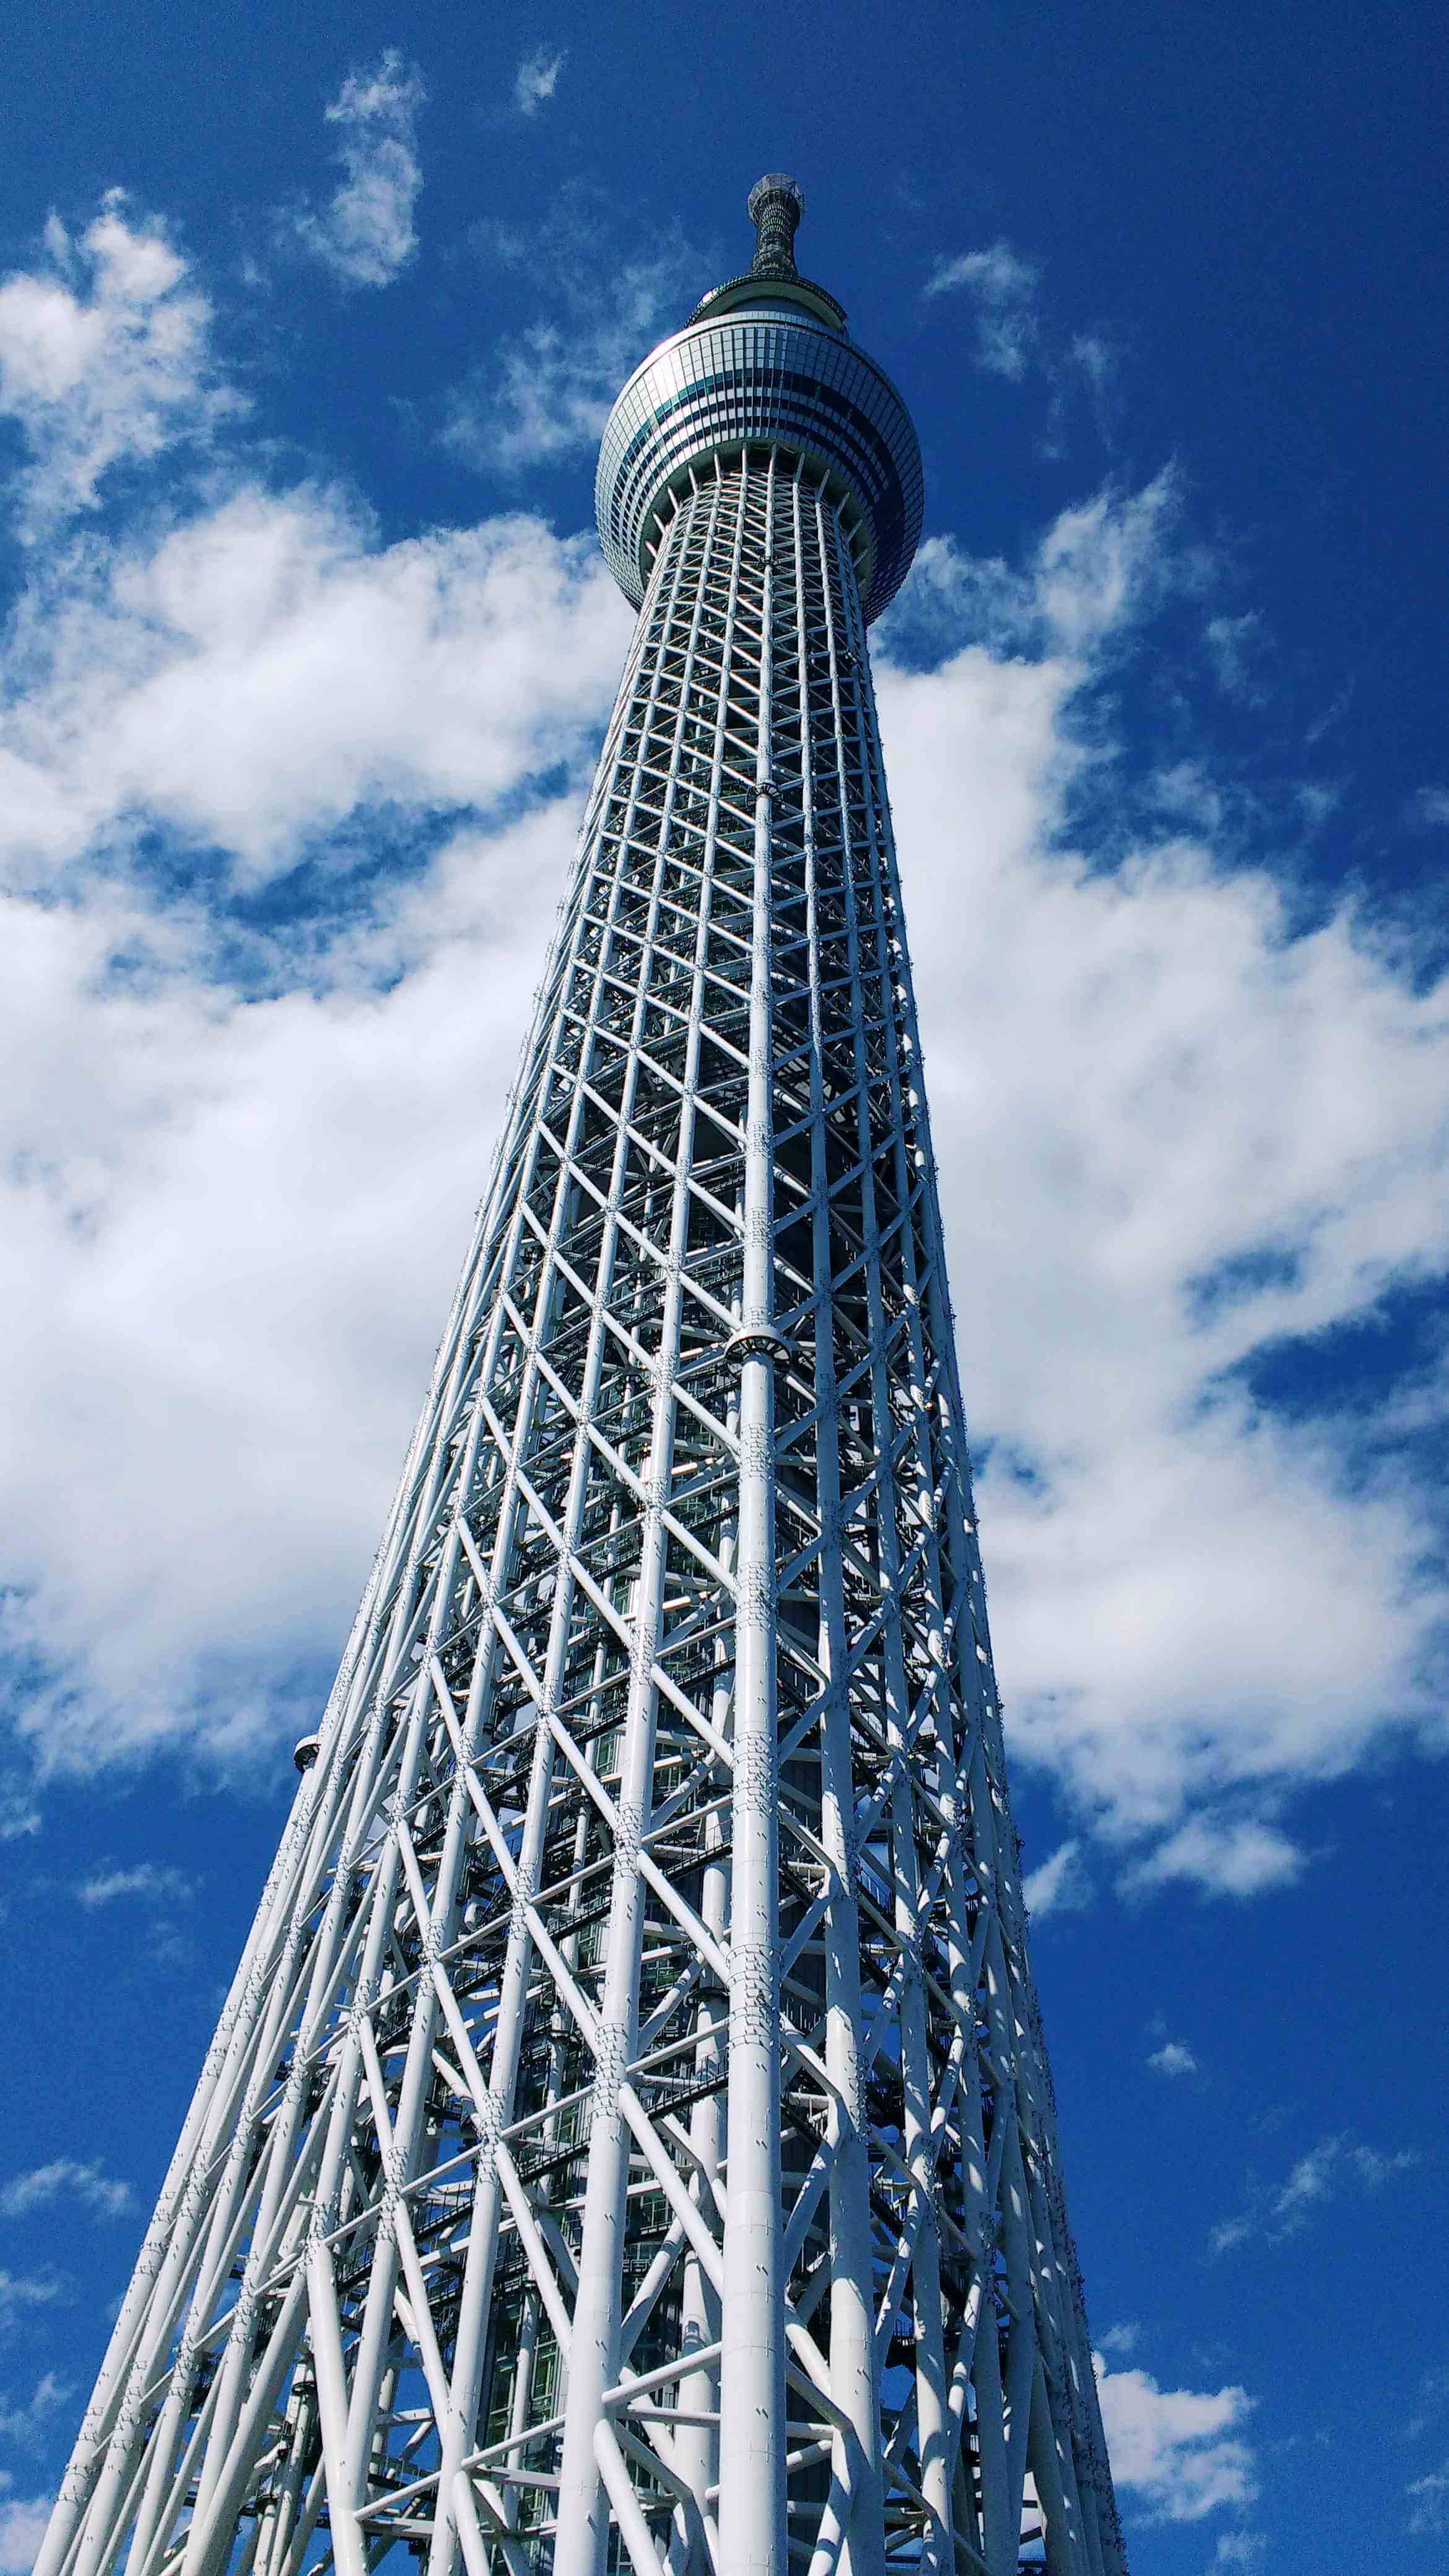 A tall metal structure with a pointed top